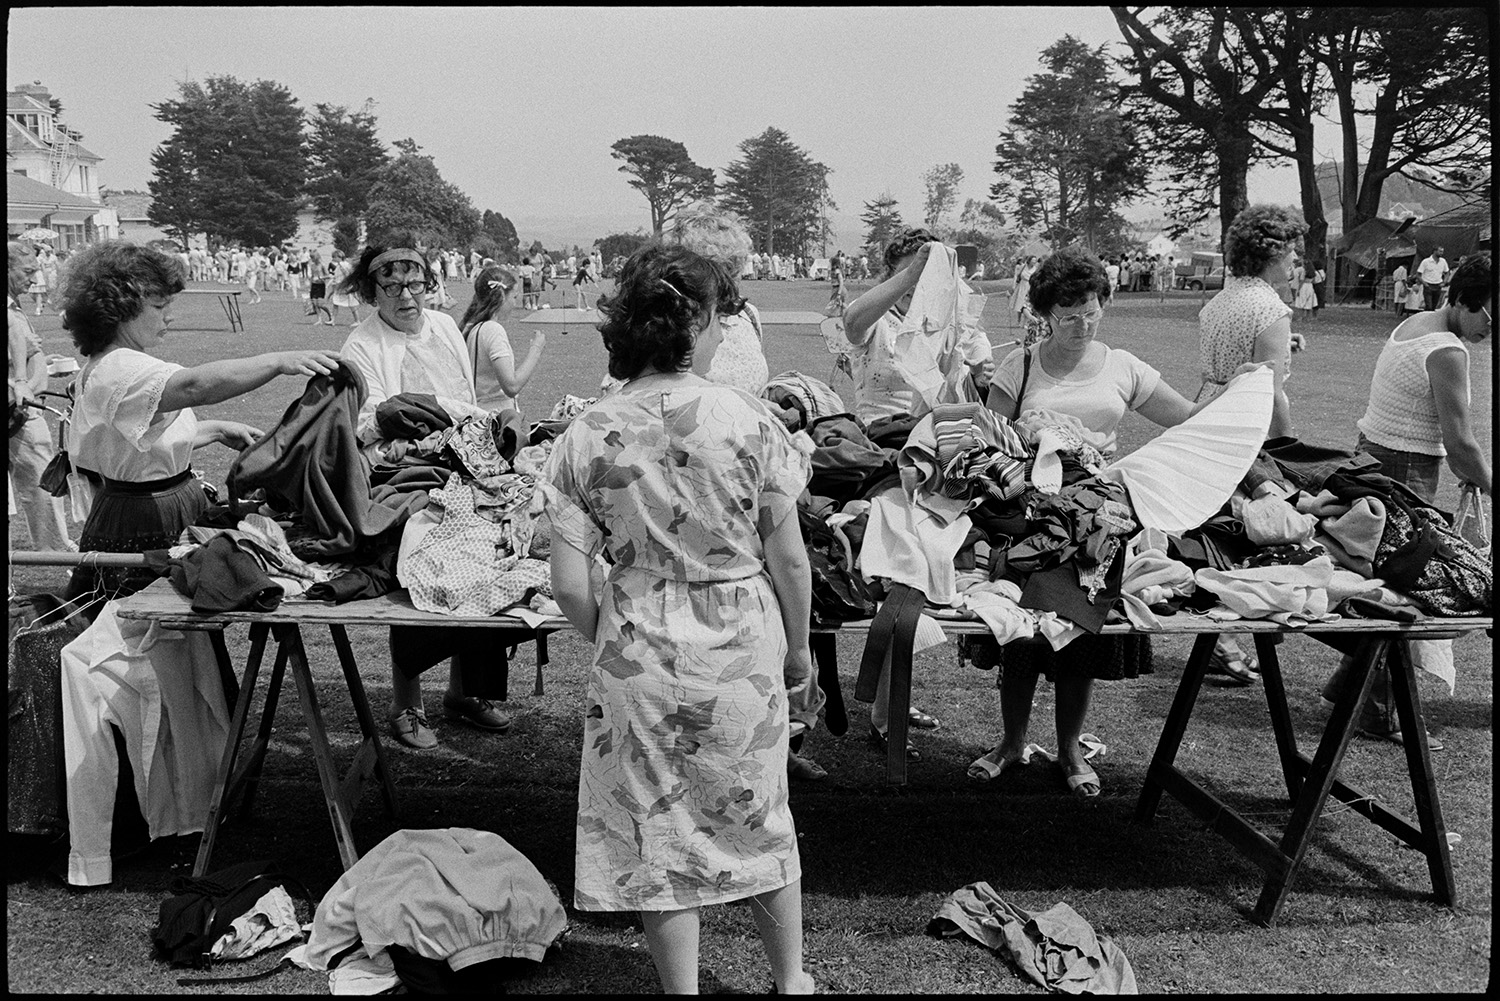 School fete. Stalls. Fancy dress. Pets being judged, pet slug 22! Produce, dogs. Vintage Car rides. 
[Women looking through clothes on a jumble stall at the school fete at Edgehill College, Bideford. Other stalls and people can be seen in the background on the school field.]